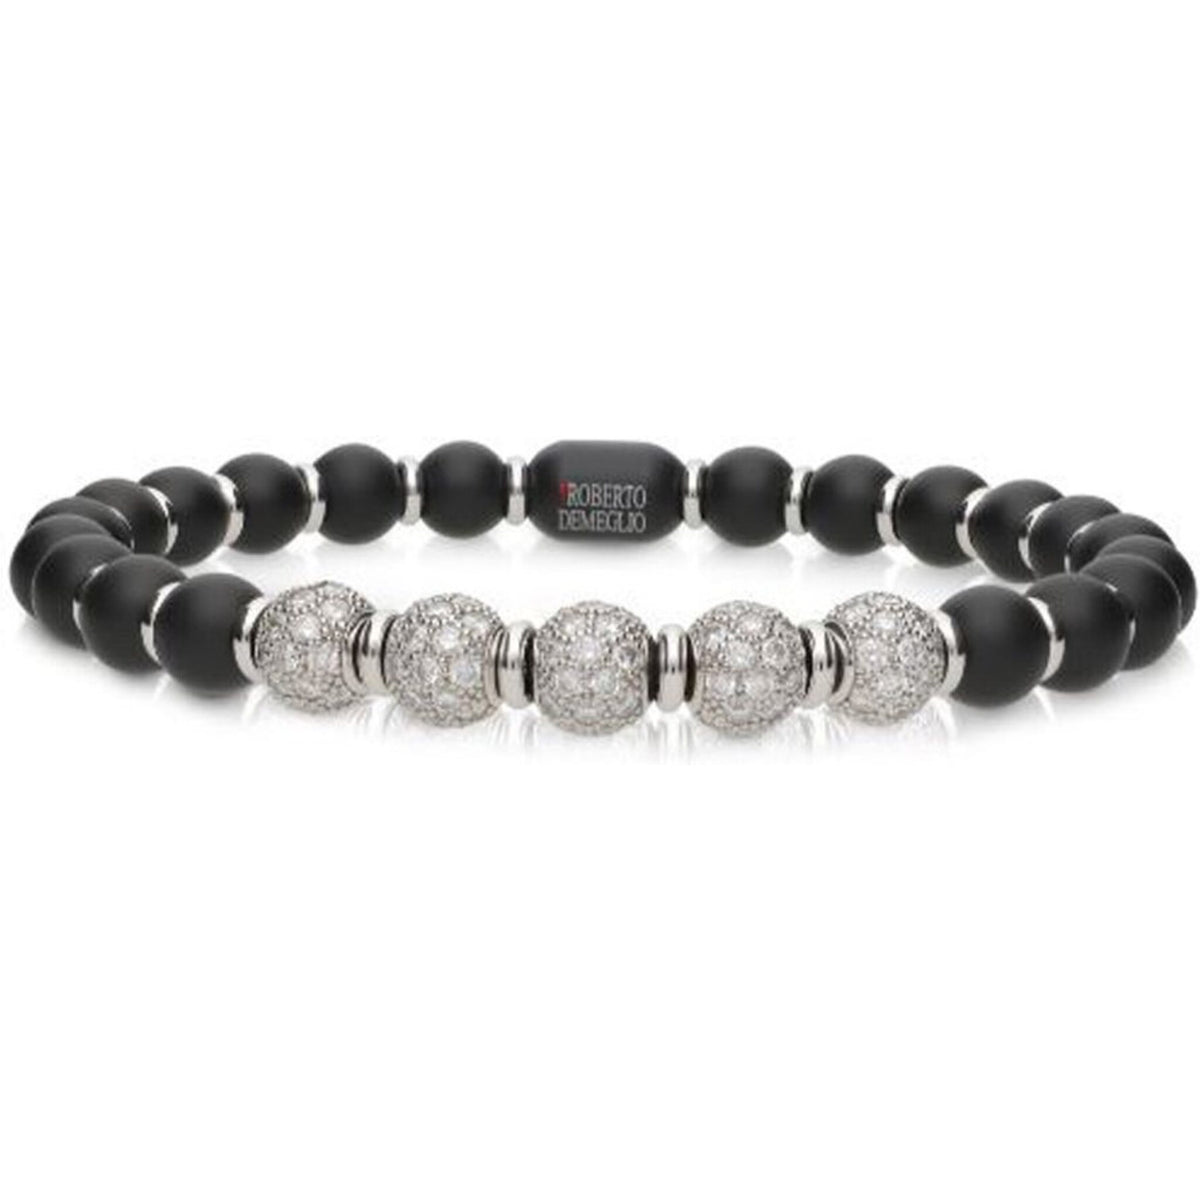 Roberto Demeglio - 6.5mm Black Matte Ceramic Stretch Bracelet and 5 Diamond Beads With Gold Rodells in 18K White Gold